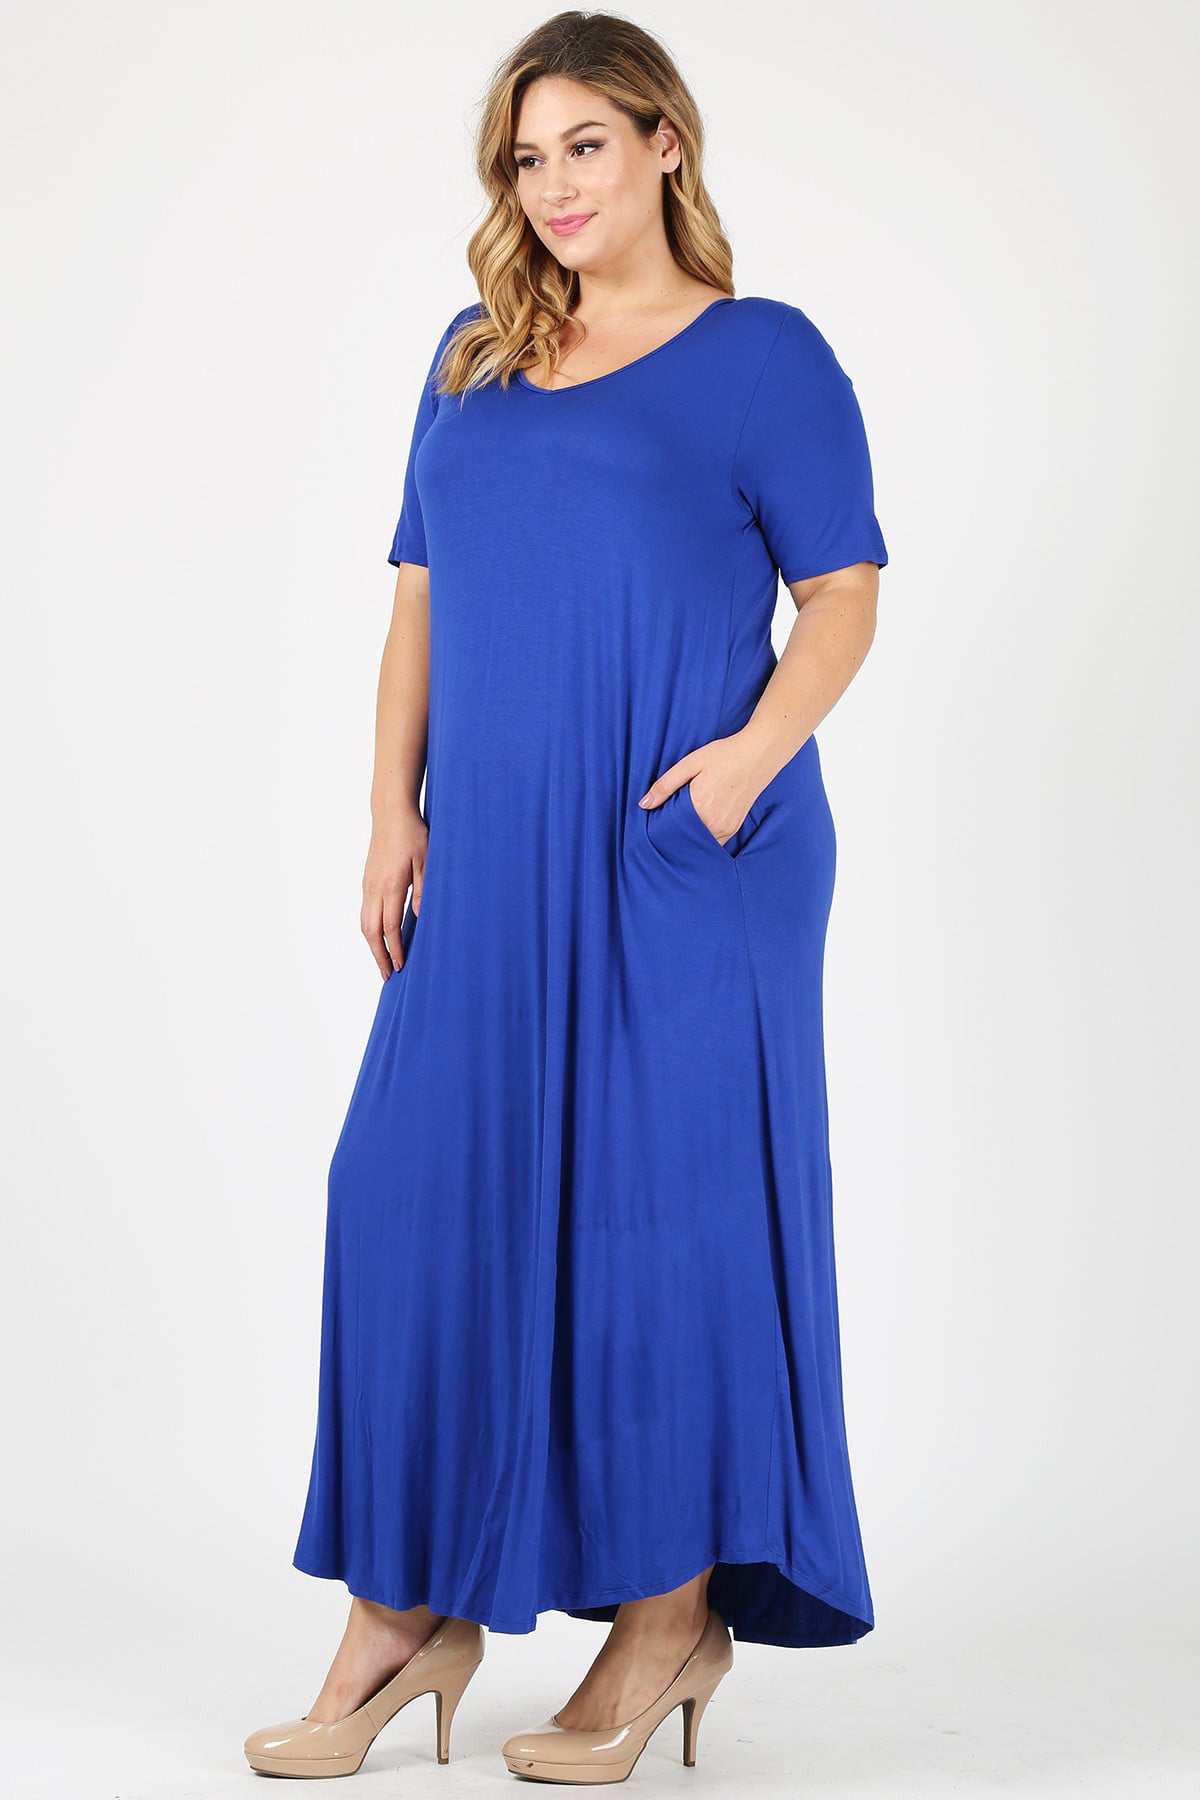 sweet-lindsey-women-plus-size-maxi-dress-with-side-pockets-long-plus